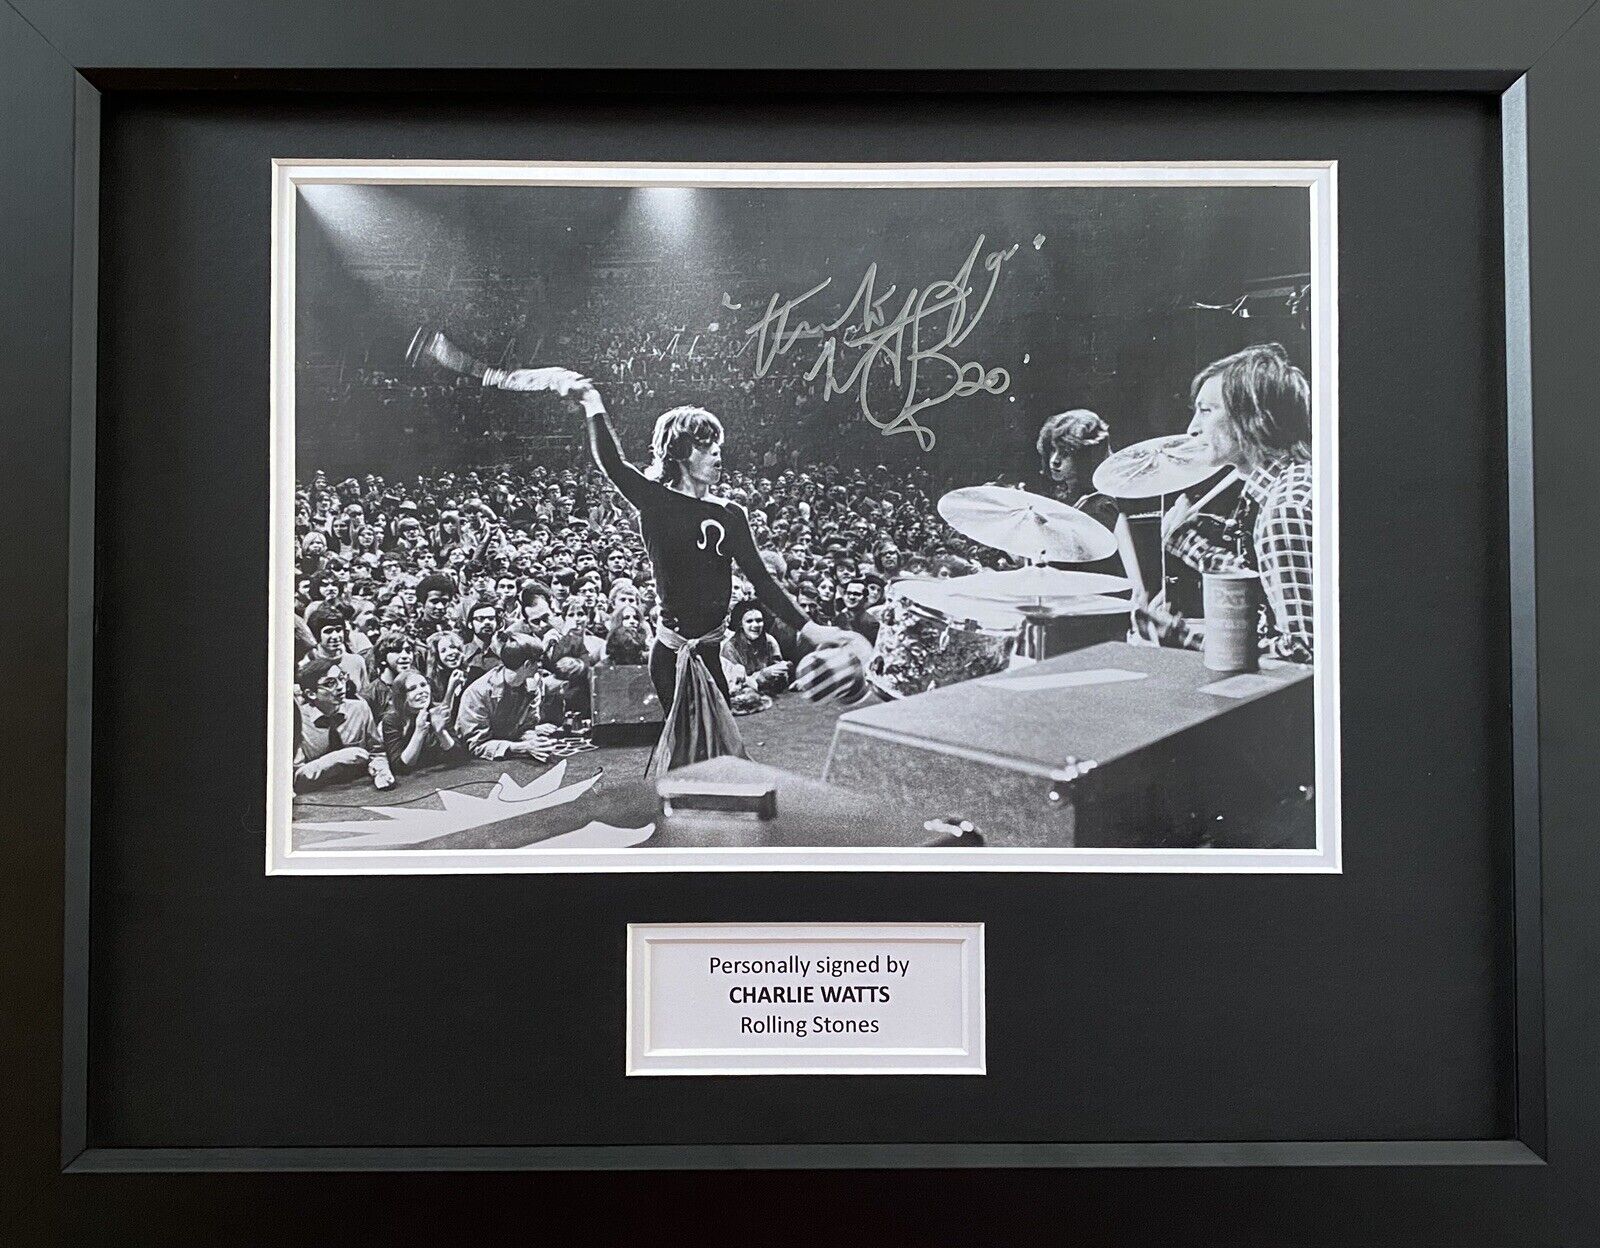 Charlie Watts Hand Signed Photo Poster painting In 16x12 Frame Display, Rolling Stones, 2